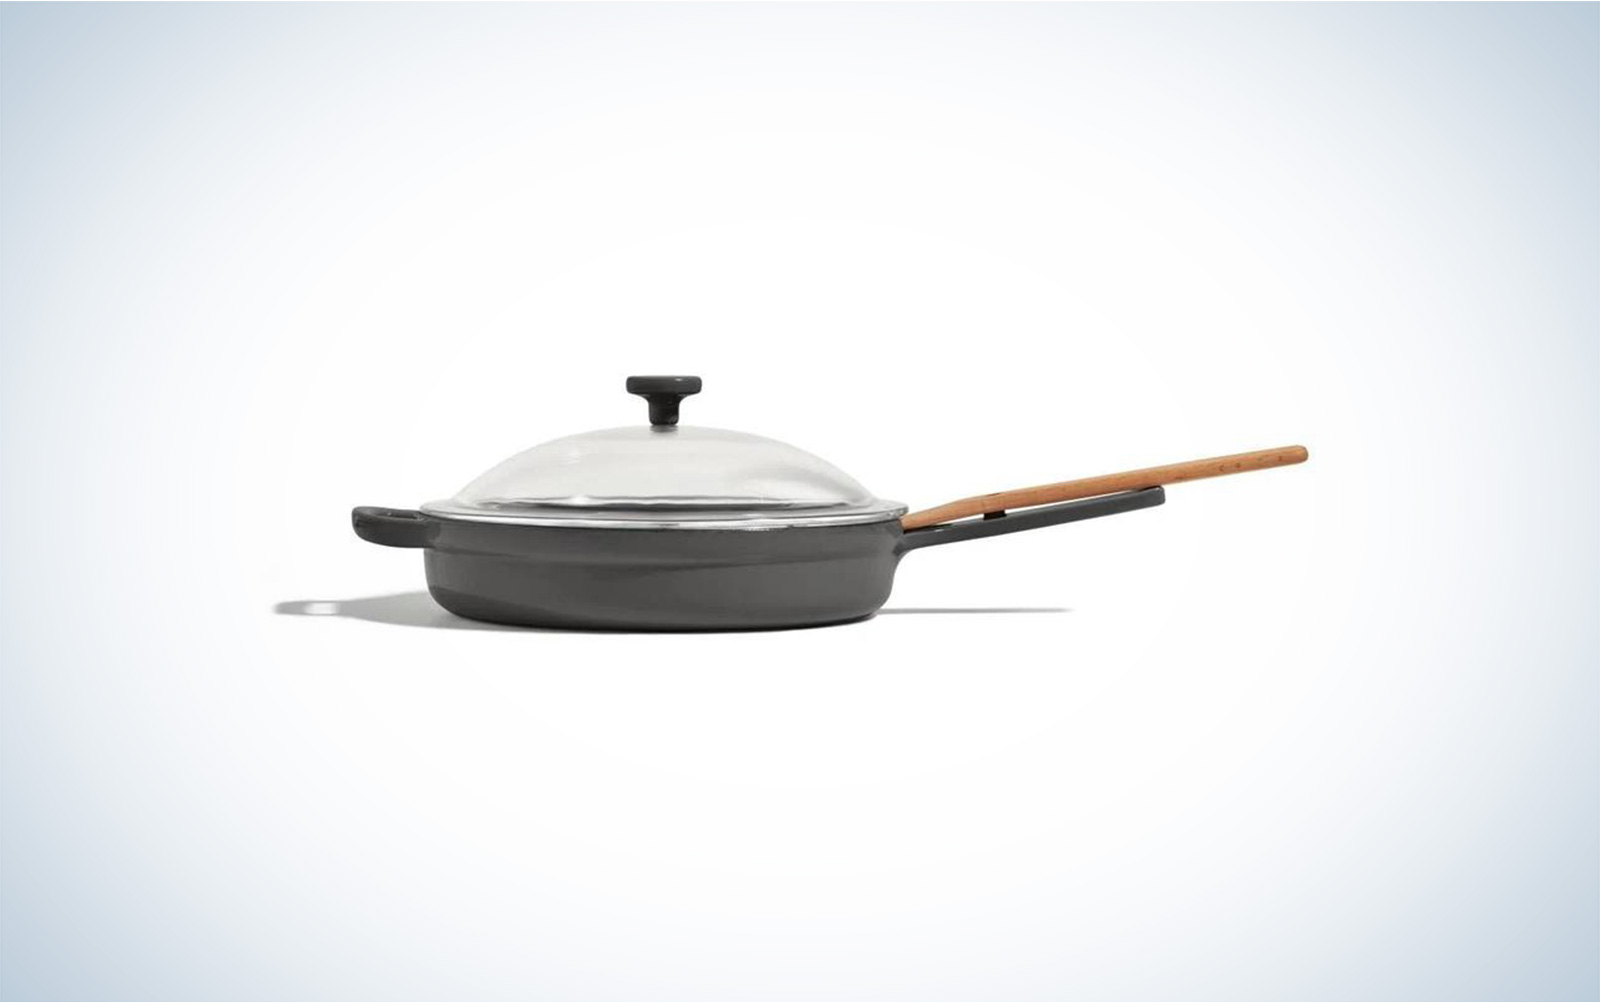 10 Best Induction Cookwares Review - The Jerusalem Post